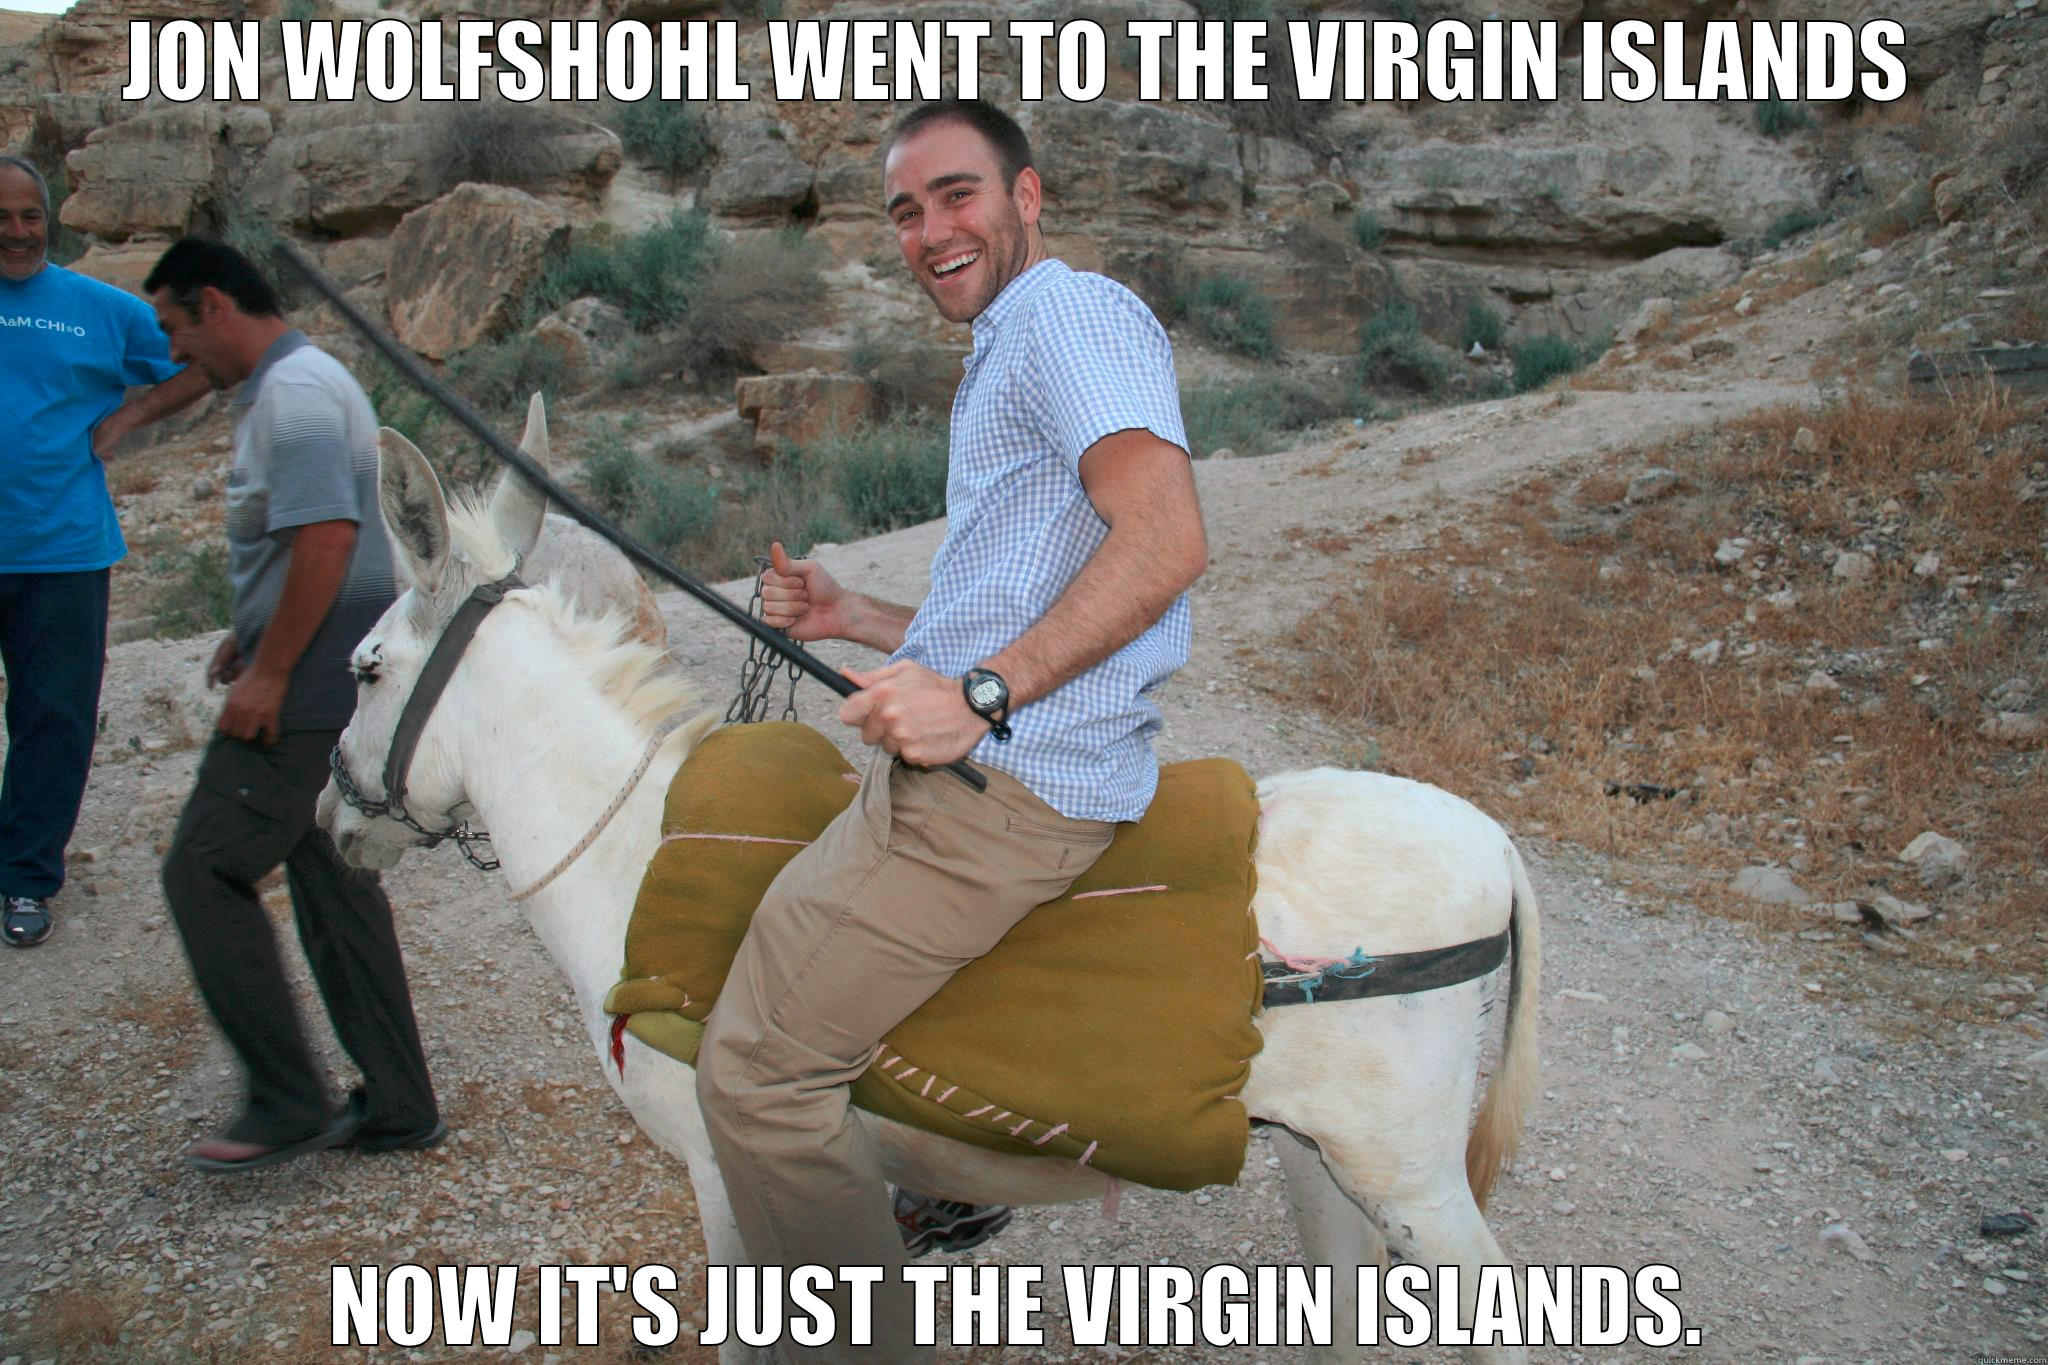 JON WOLFSHOHL WENT TO THE VIRGIN ISLANDS NOW IT'S JUST THE VIRGIN ISLANDS. Misc